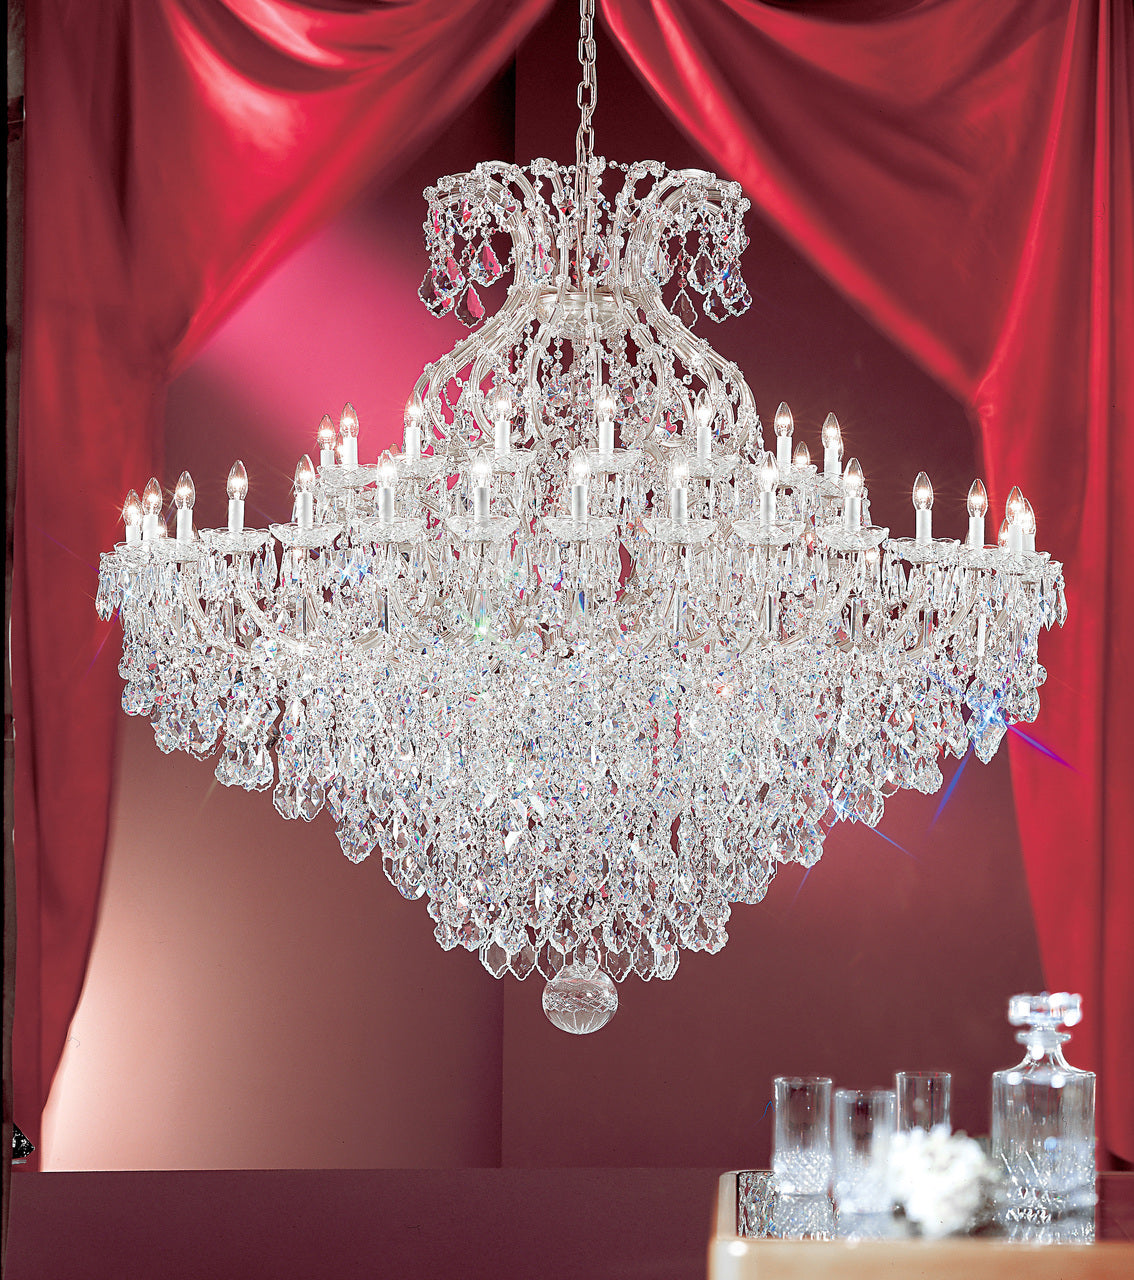 Classic Lighting 8188 CH C Maria Theresa Traditional Crystal Chandelier in Chrome (Imported from Italy)